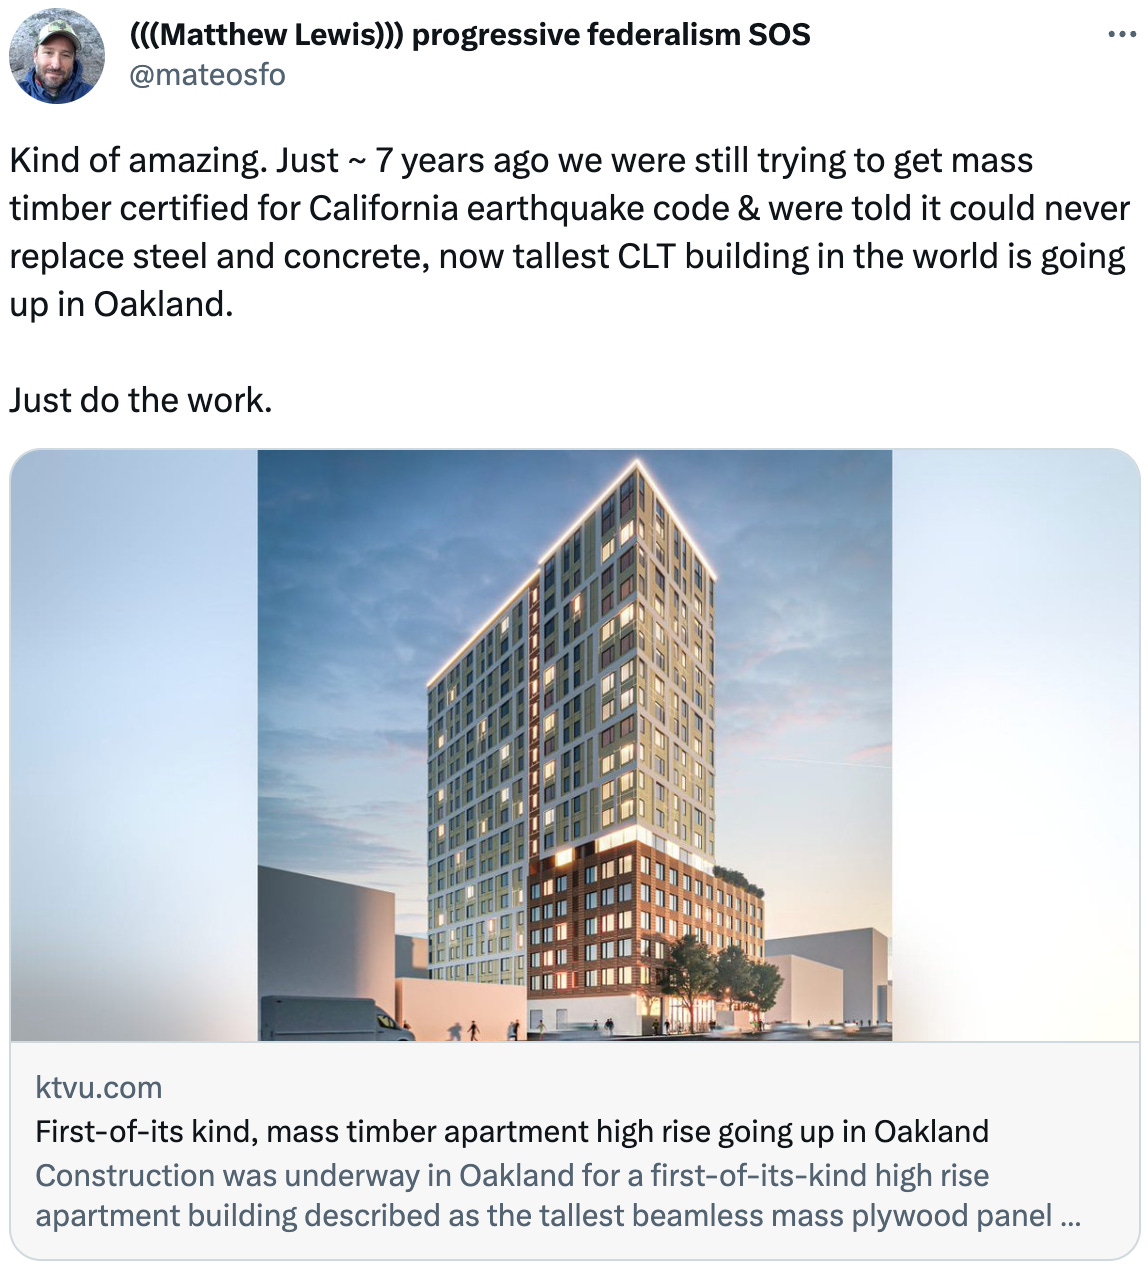  See new Tweets Conversation (((Matthew Lewis))) progressive federalism SOS @mateosfo Kind of amazing. Just ~ 7 years ago we were still trying to get mass timber certified for California earthquake code & were told it could never replace steel and concrete, now tallest CLT building in the world is going up in Oakland.   Just do the work. ktvu.com First-of-its kind, mass timber apartment high rise going up in Oakland Construction was underway in Oakland for a first-of-its-kind high rise apartment building described as the tallest beamless mass plywood panel structure in the world.